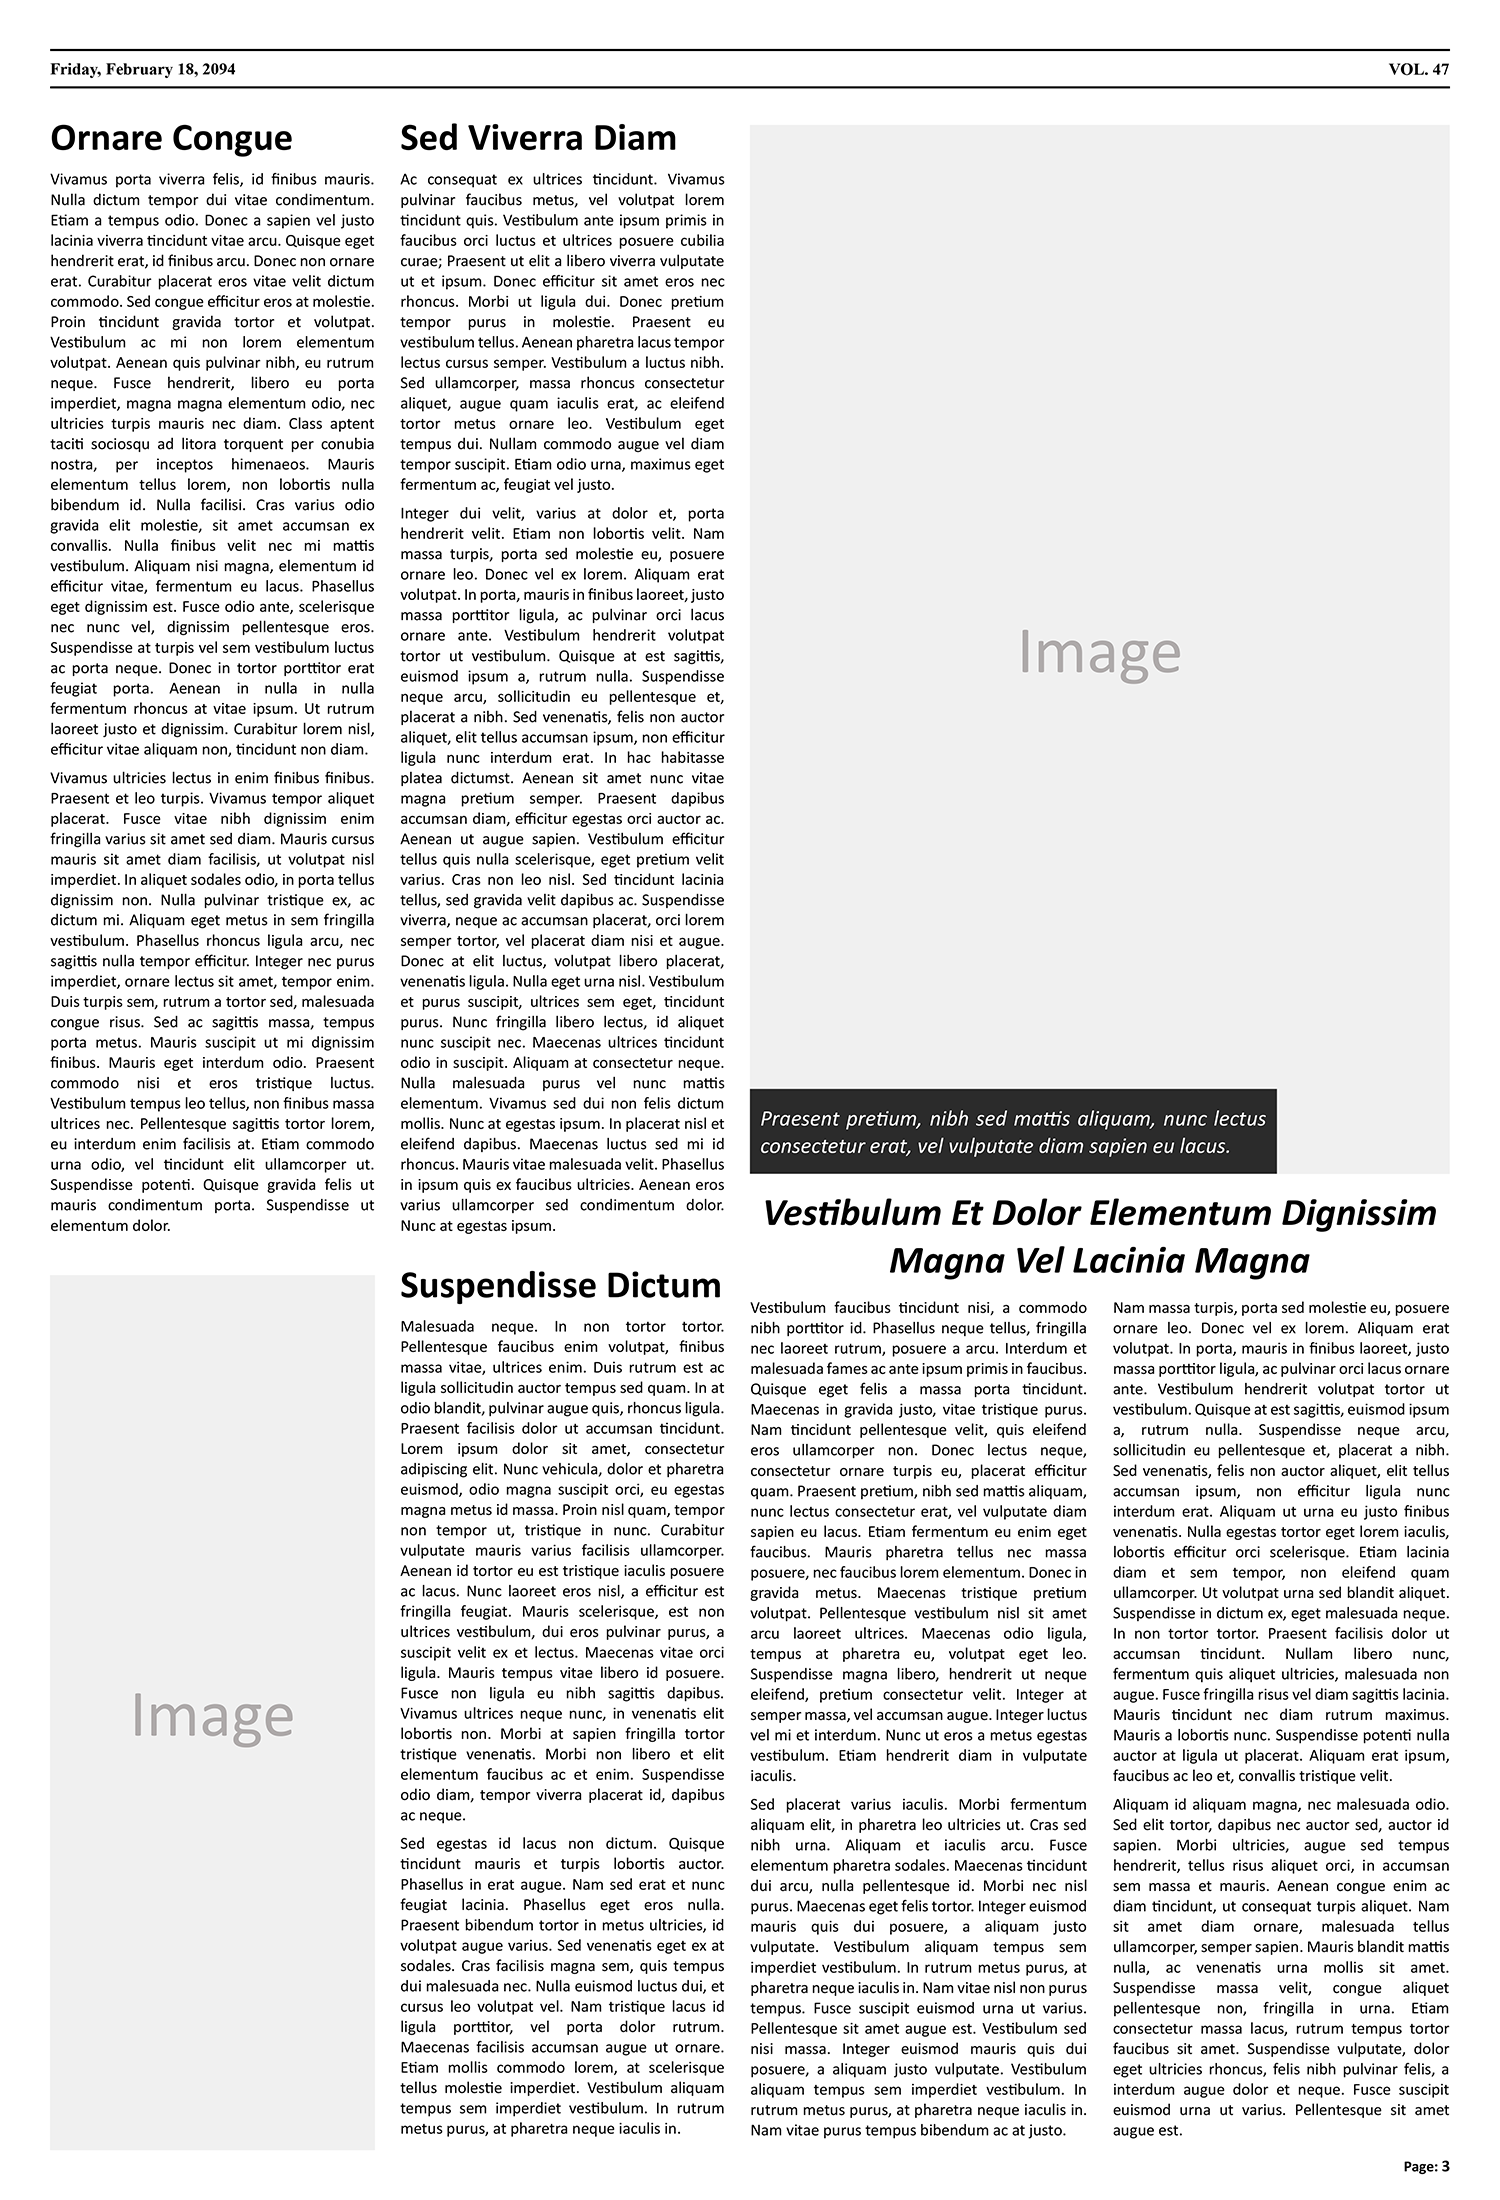 Blank Newspaper Article Page Template - Page 03